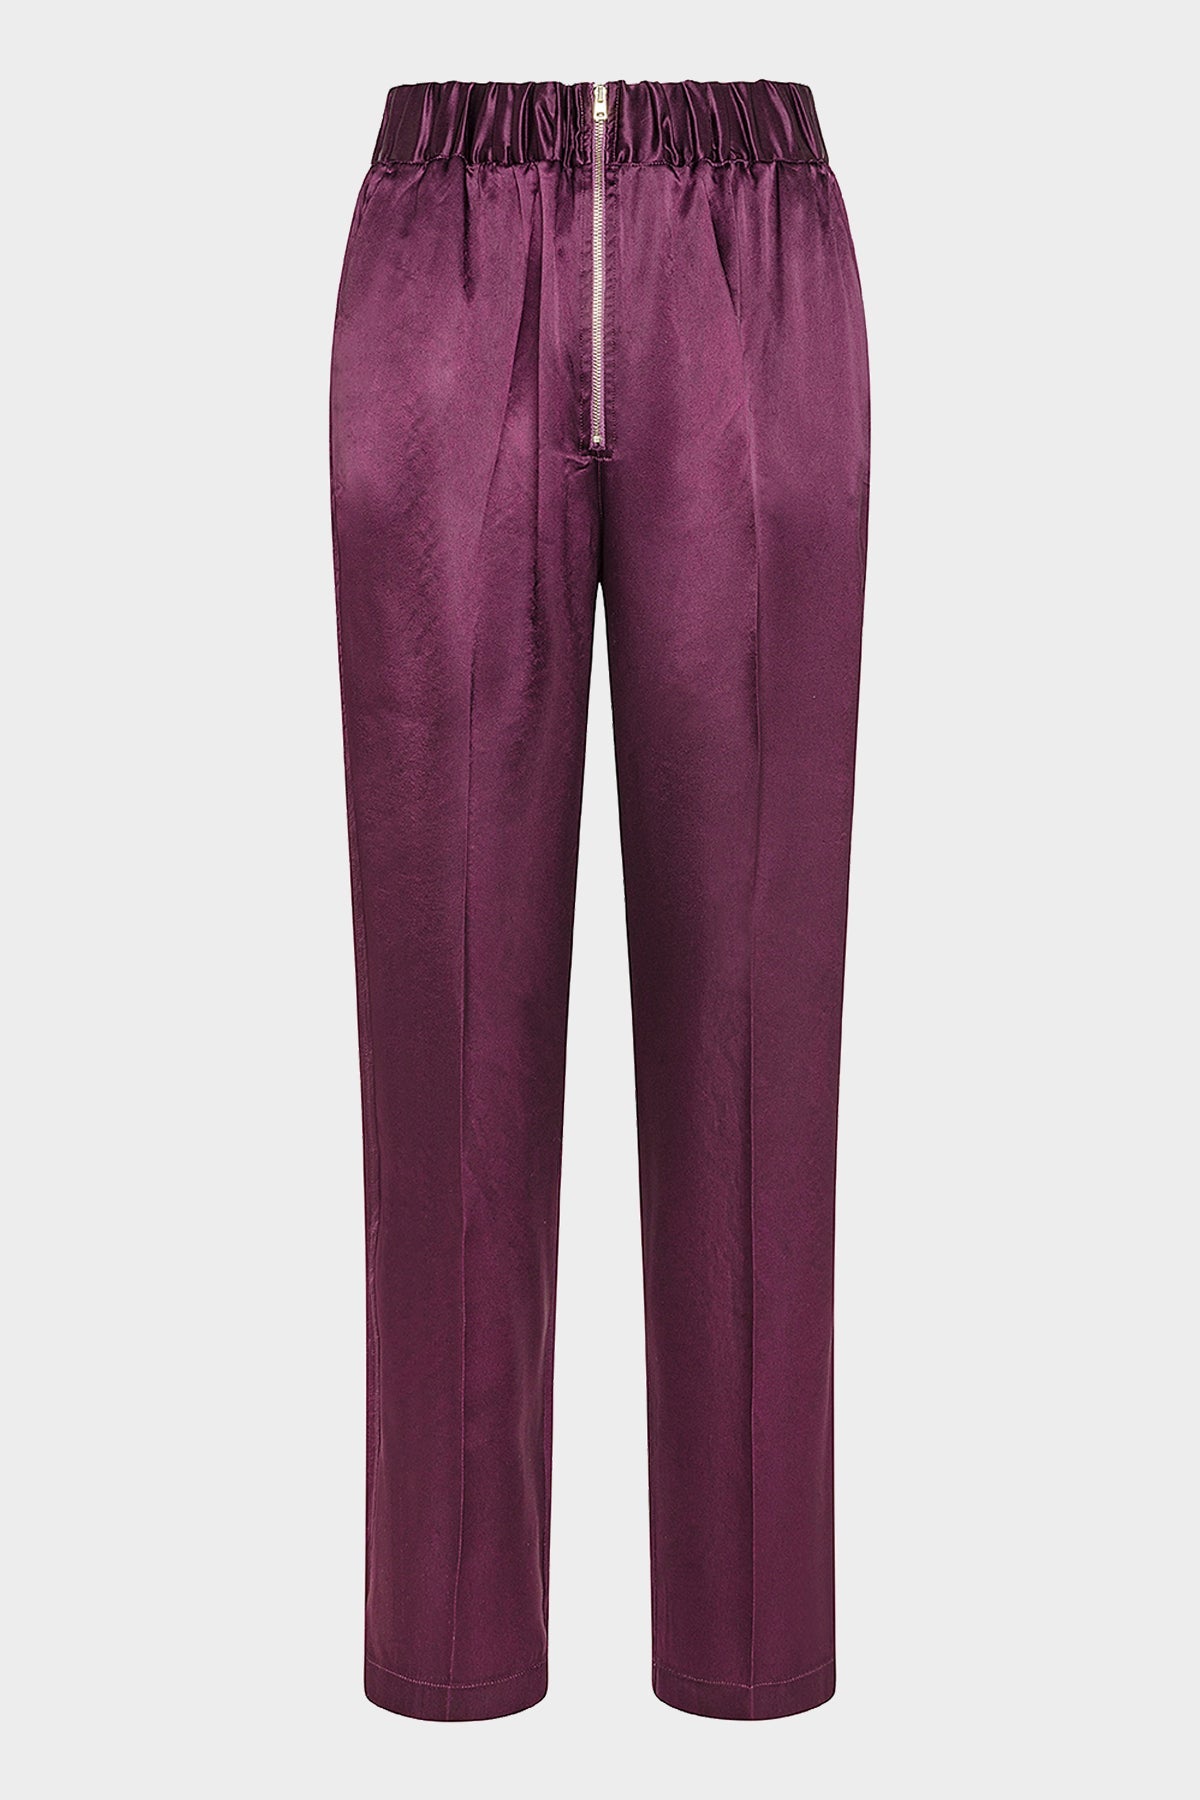 Viscose Satin Chic Elastic Pants with Frontal Zip in Ruby - shop-olivia.com